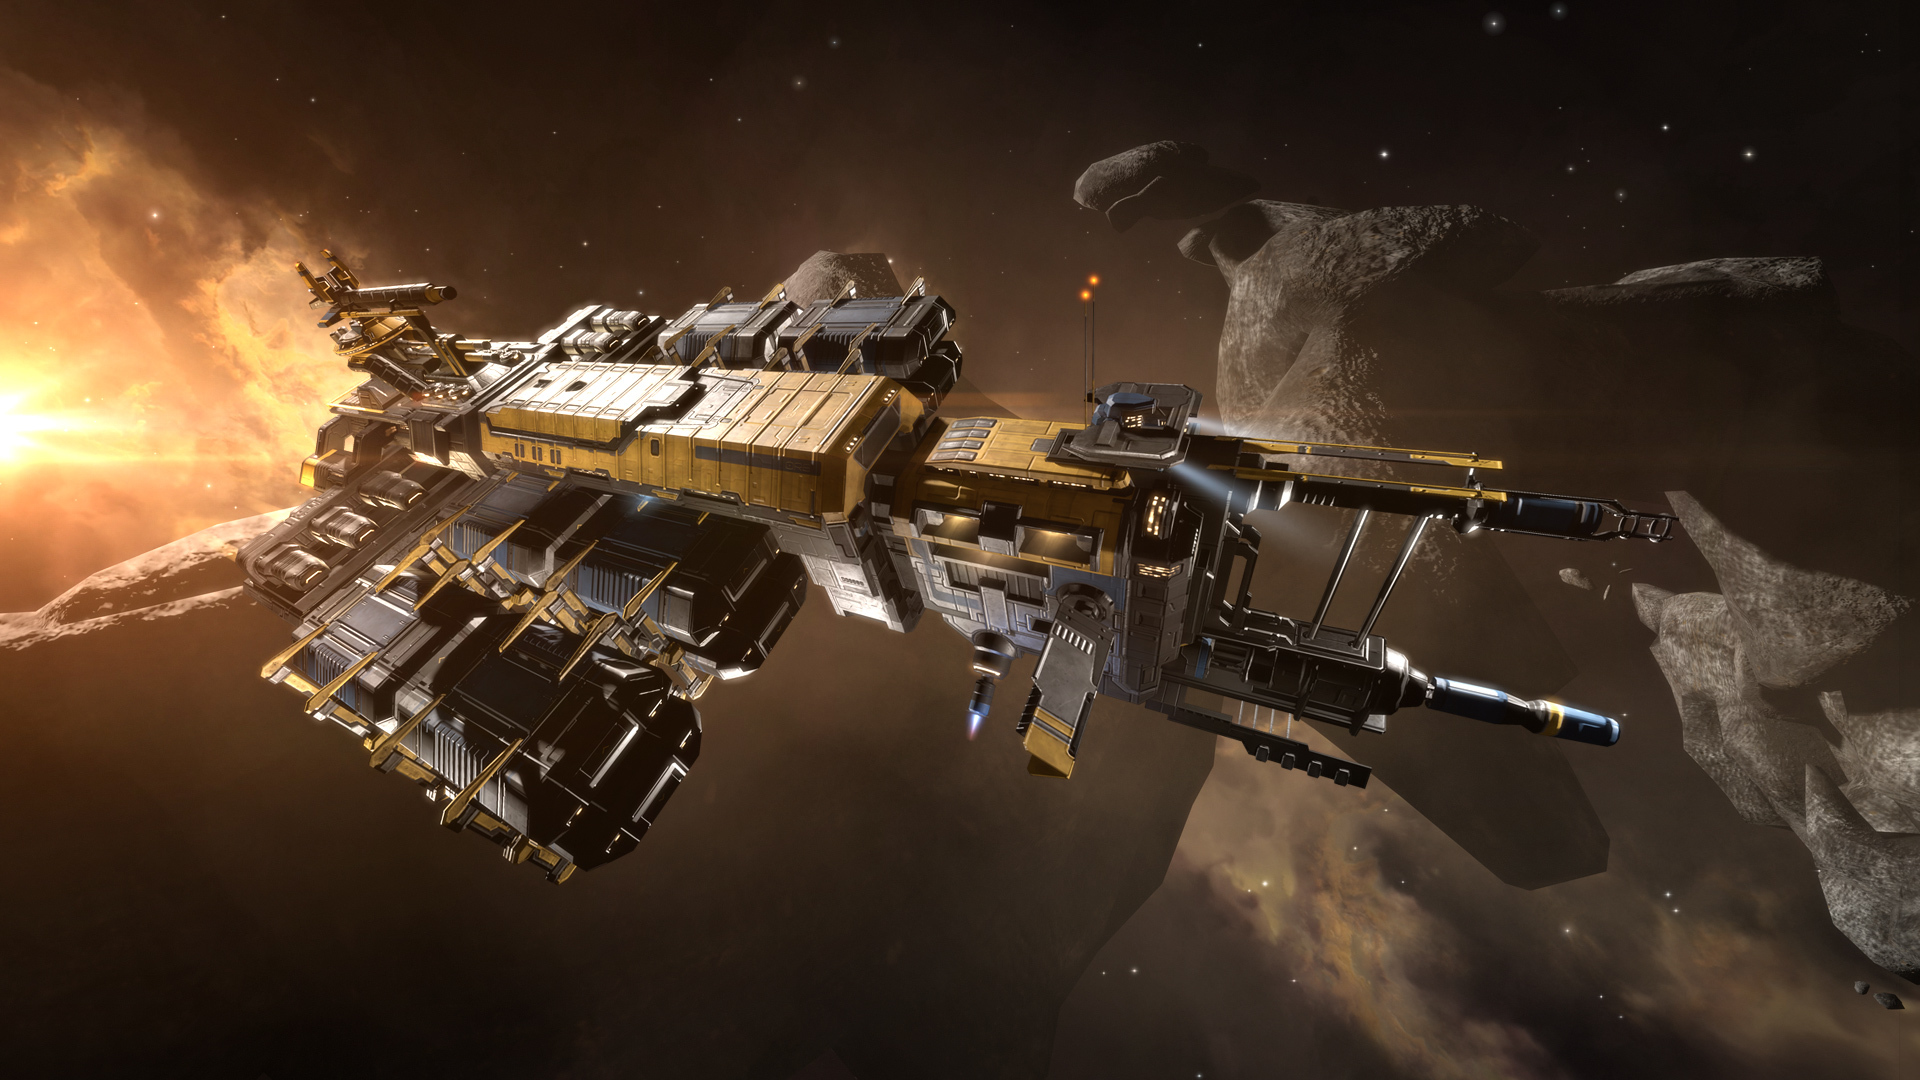 Apr 1 Gate to Stain Under Construction EVE Online - EVE Online Stain-based  Capsuleers, As part of our next Quadrant release, you can expect to see a  new route opening up in the southern regions of New Eden bringing a  long-awaited Lowsec gate to ...